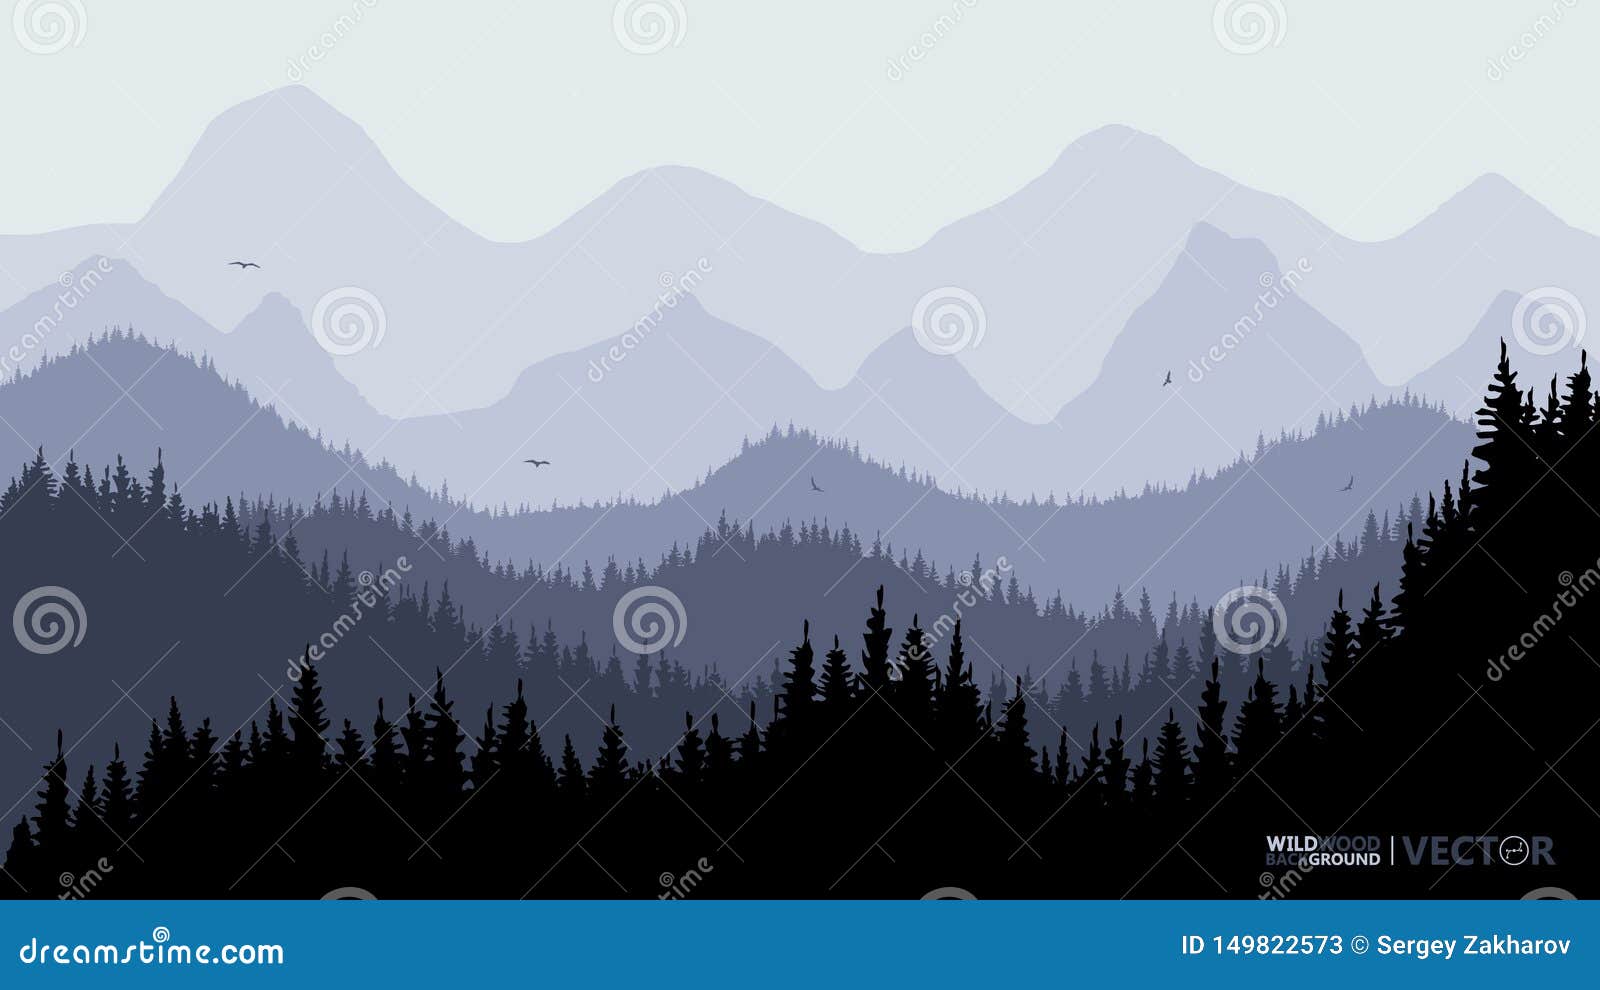 tranquil backdrop, pine forests, mountains in the background. dark blue tones